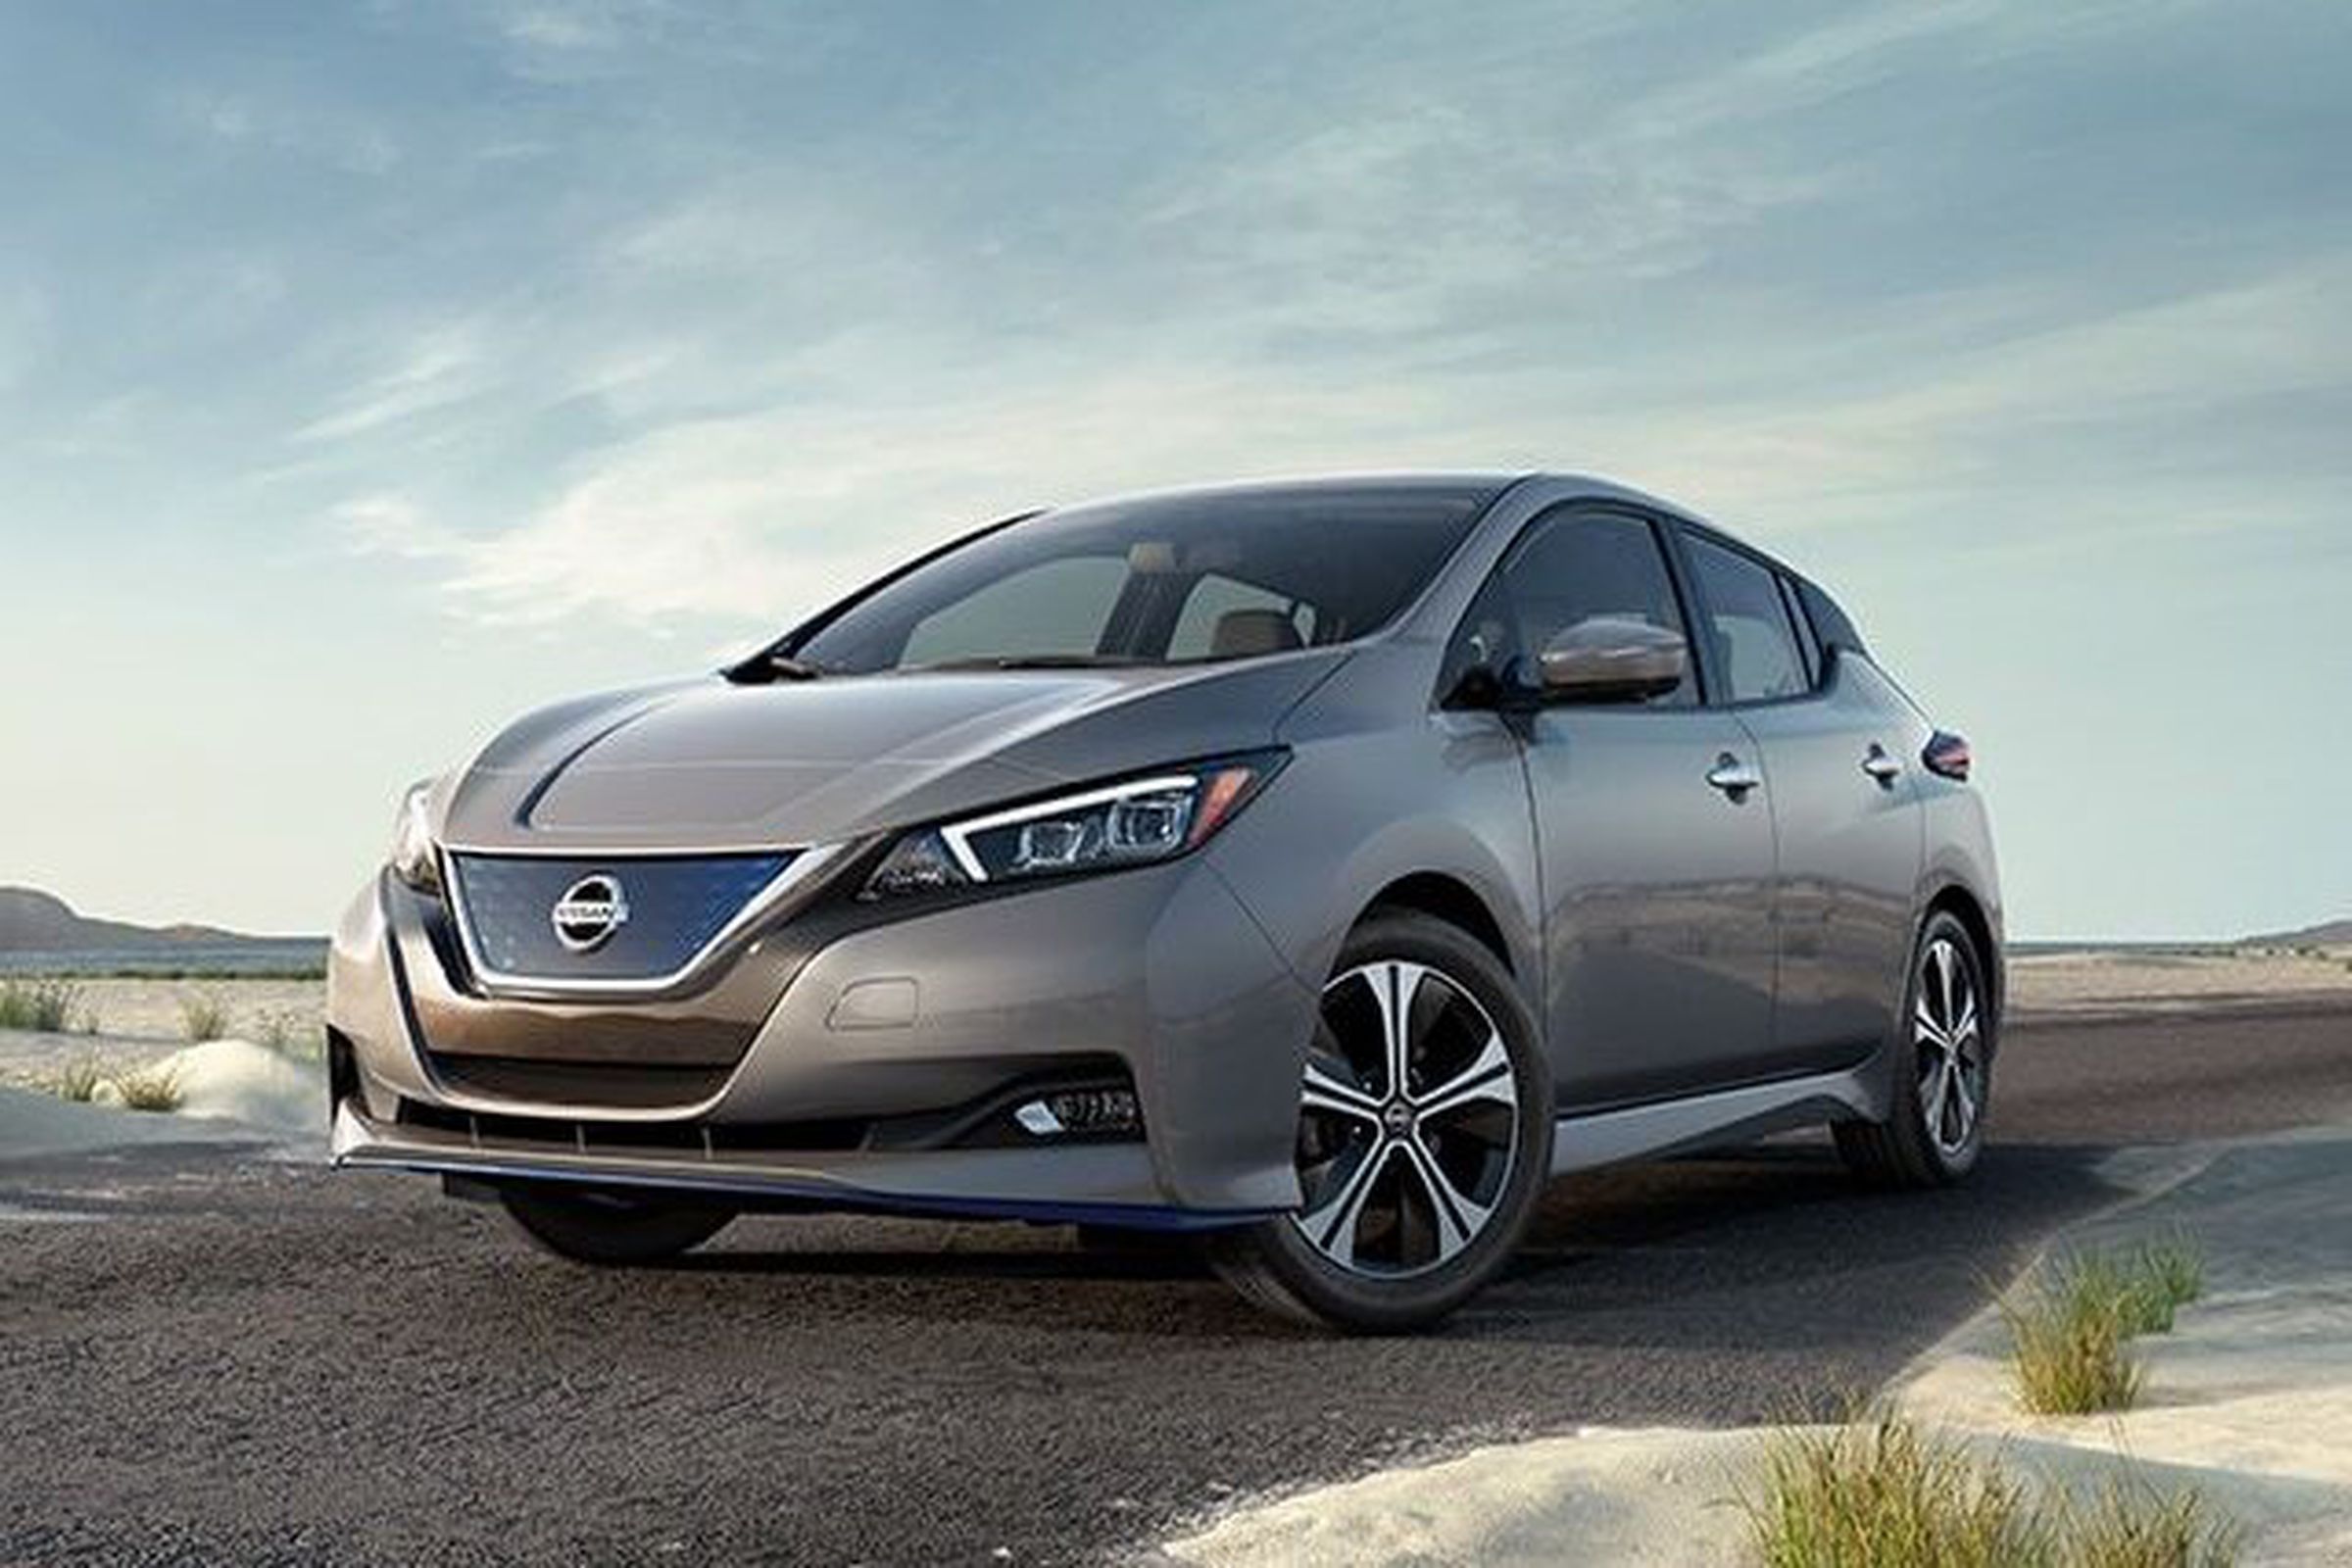 The entry-level Nissan Leaf now starts at $27,400.